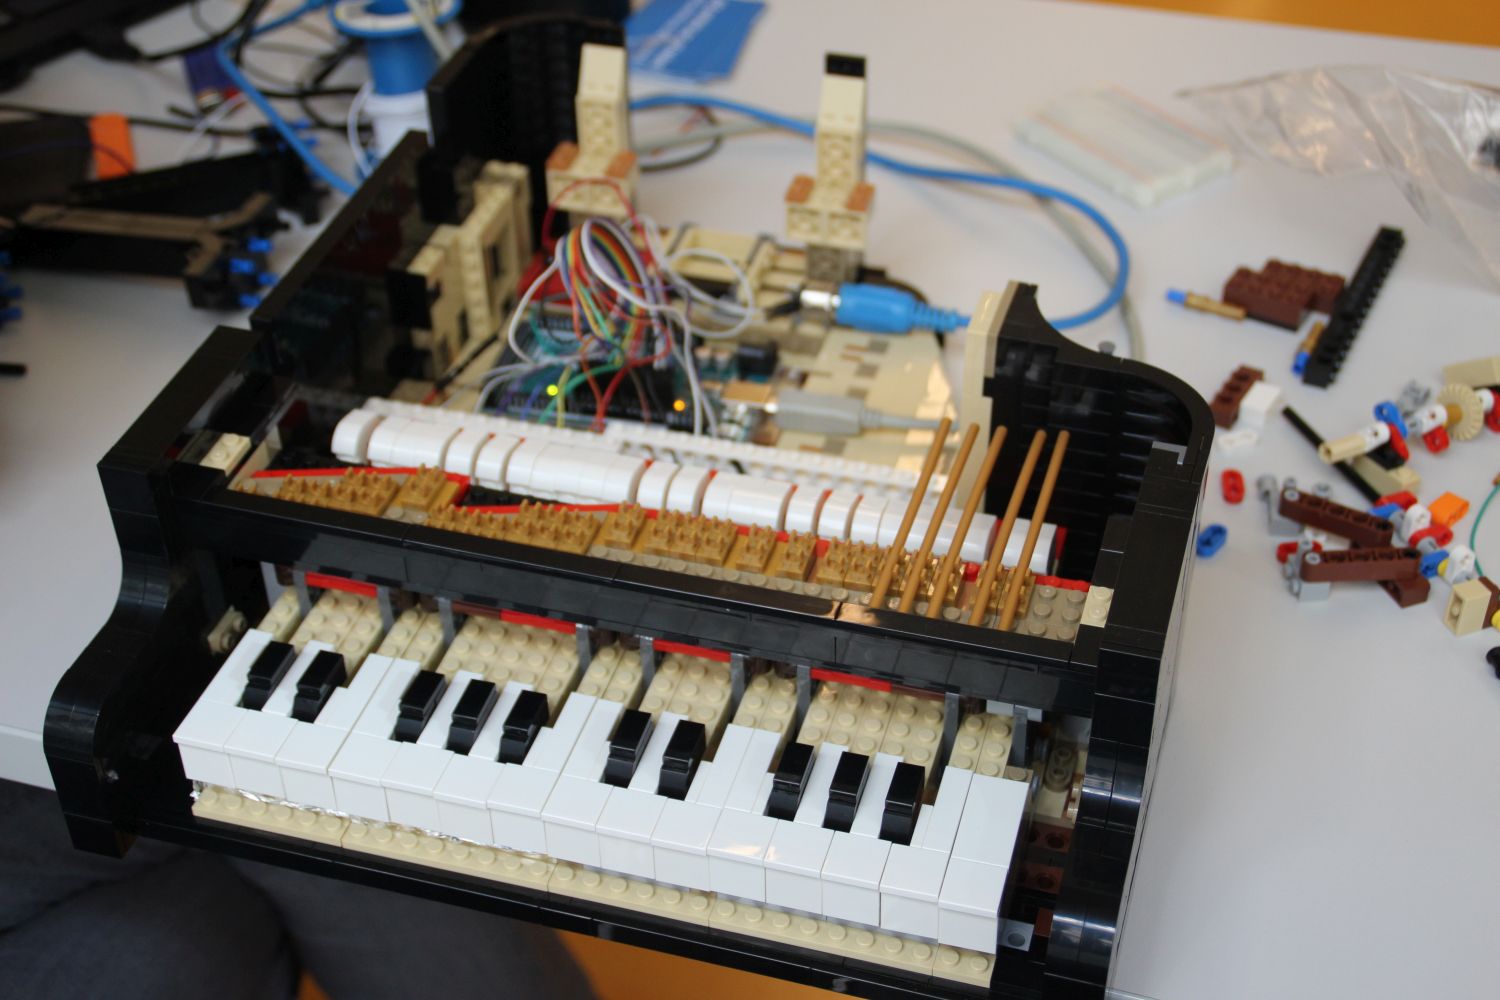 Playel - a real playable Lego MIDI Grand Piano electrified by Oliver Hödl